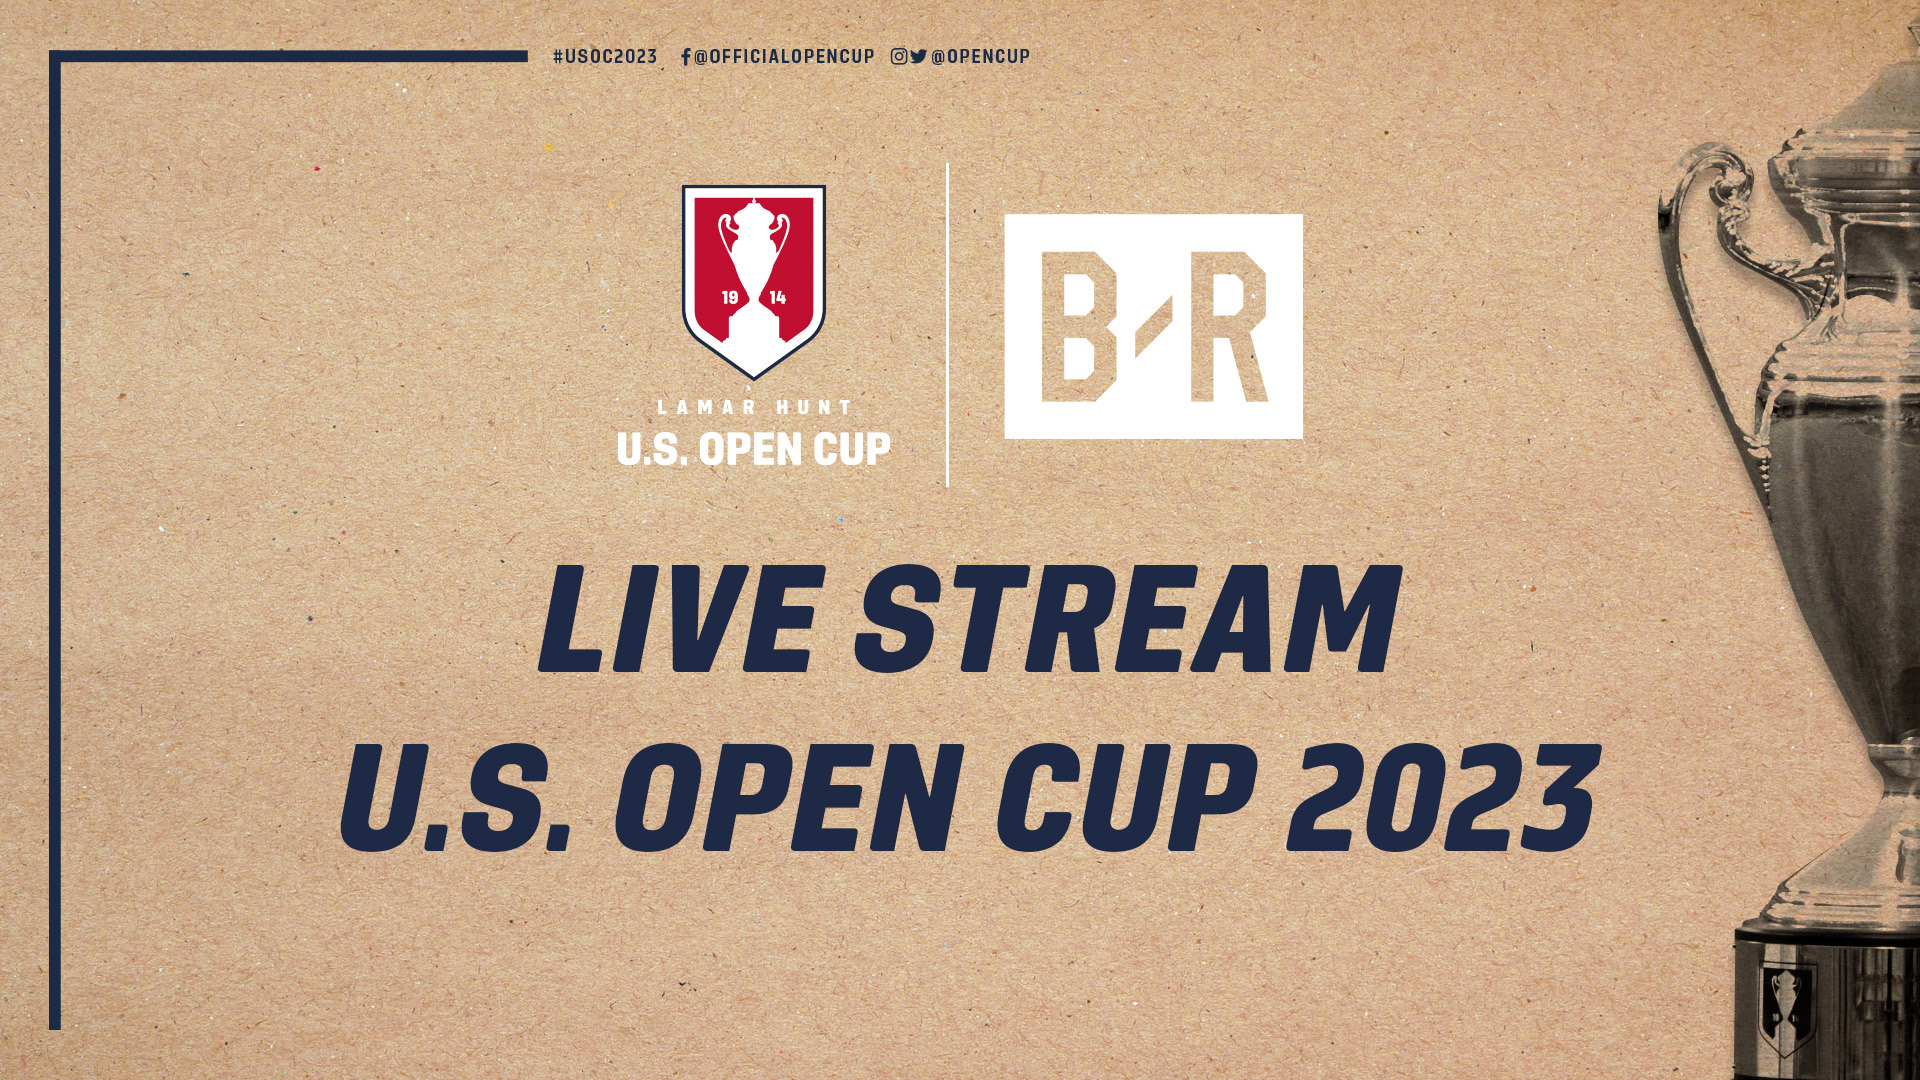 How to Watch U.S. Open Cup Soccer 2023: Live Feed, Stream Online Free